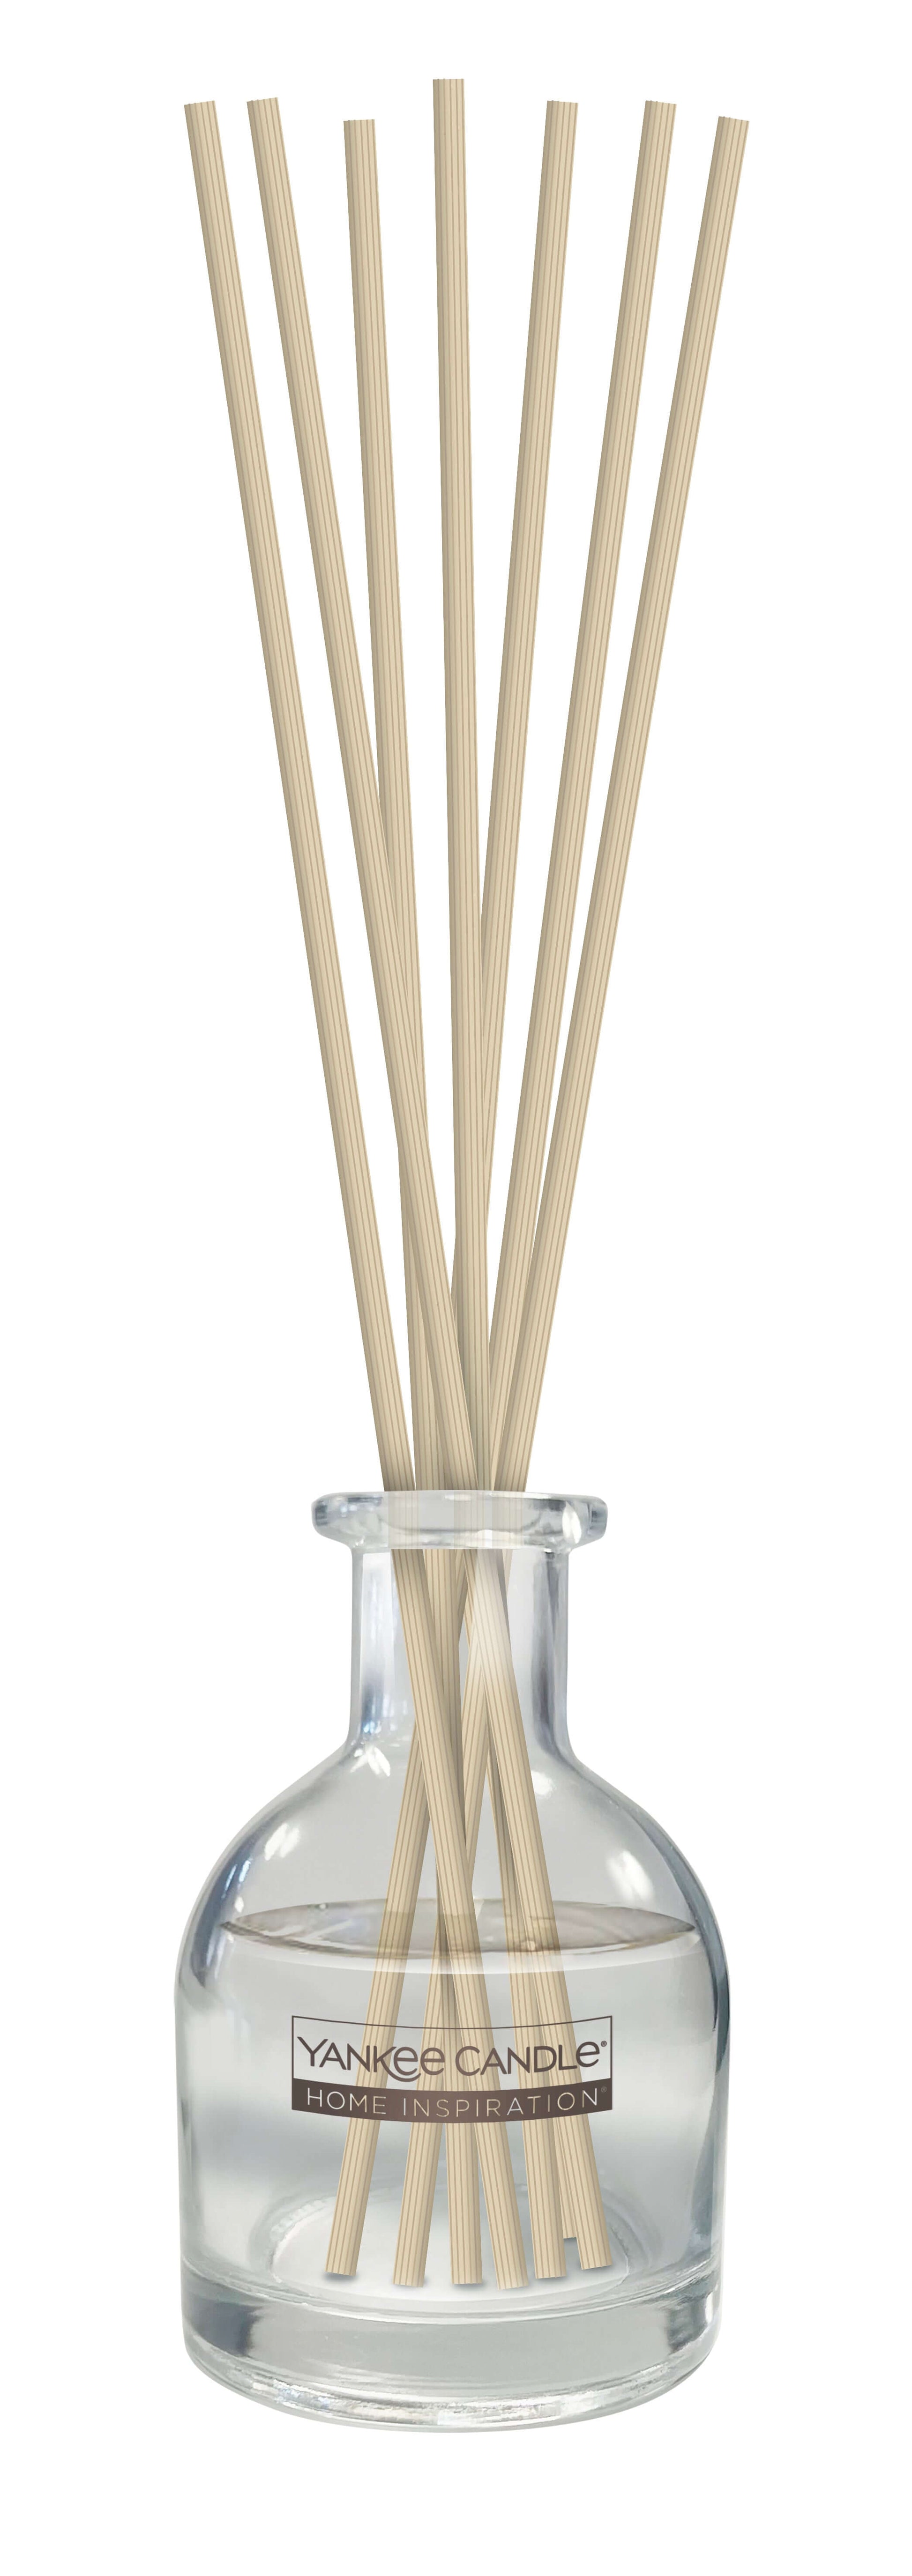 White Linen & Lace Reed Diffuser This elegant fragrance by Yankee Candle® Home Inspiration® features top notes of ozonic breeze, apple blossom, and raspberry leaf; mid notes of iris muguet, ylang petals, and white jasmine.